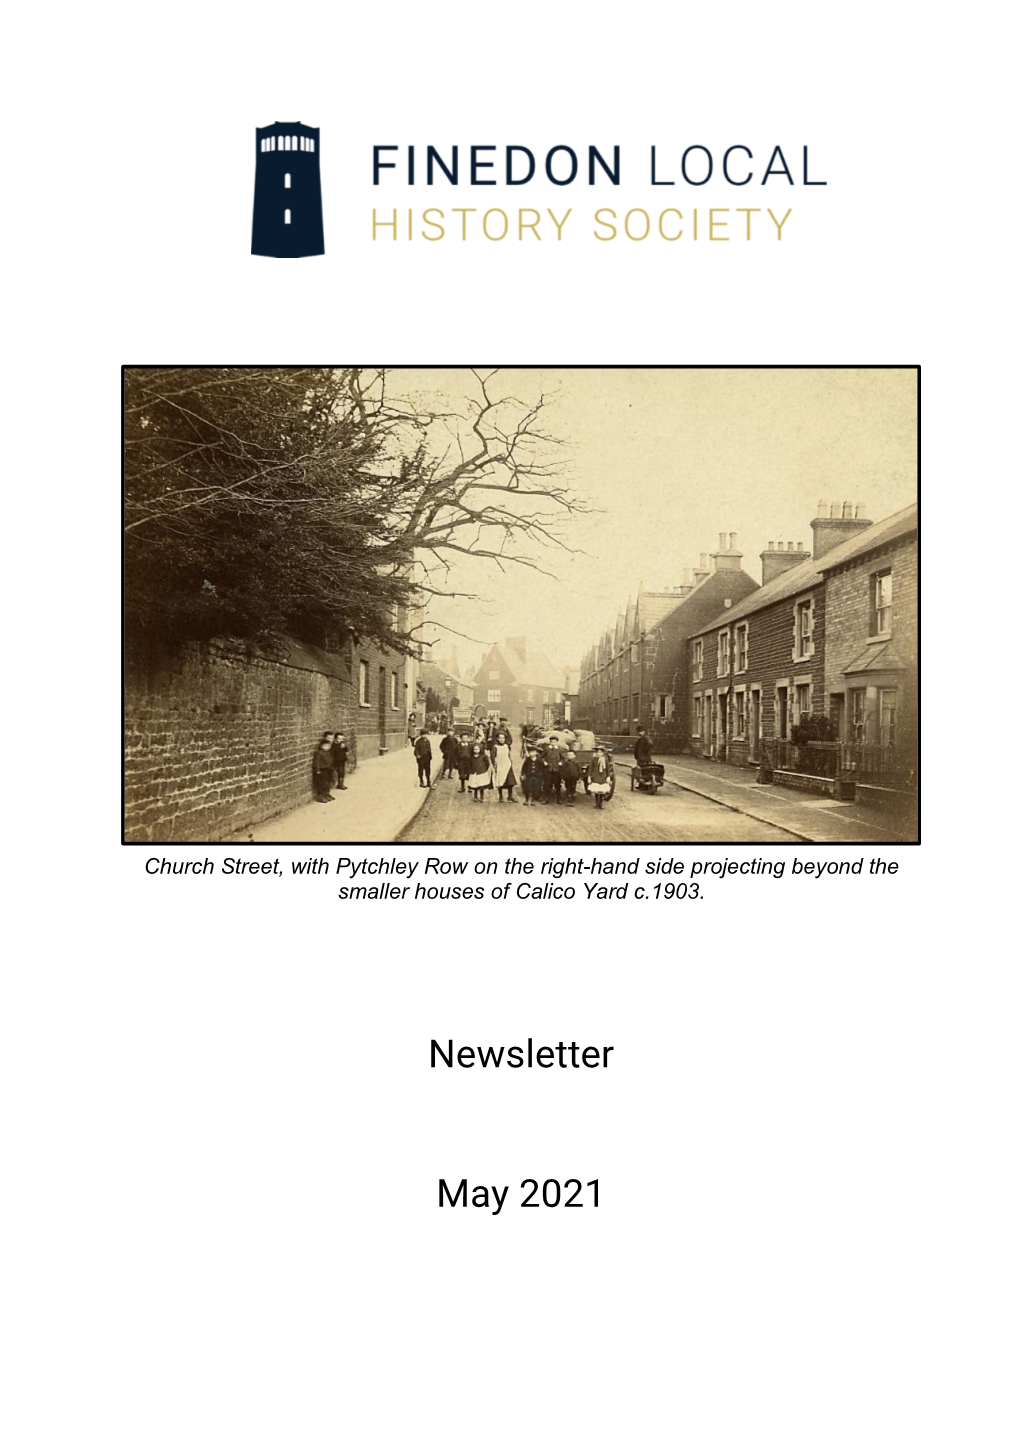 Newsletter May 2021